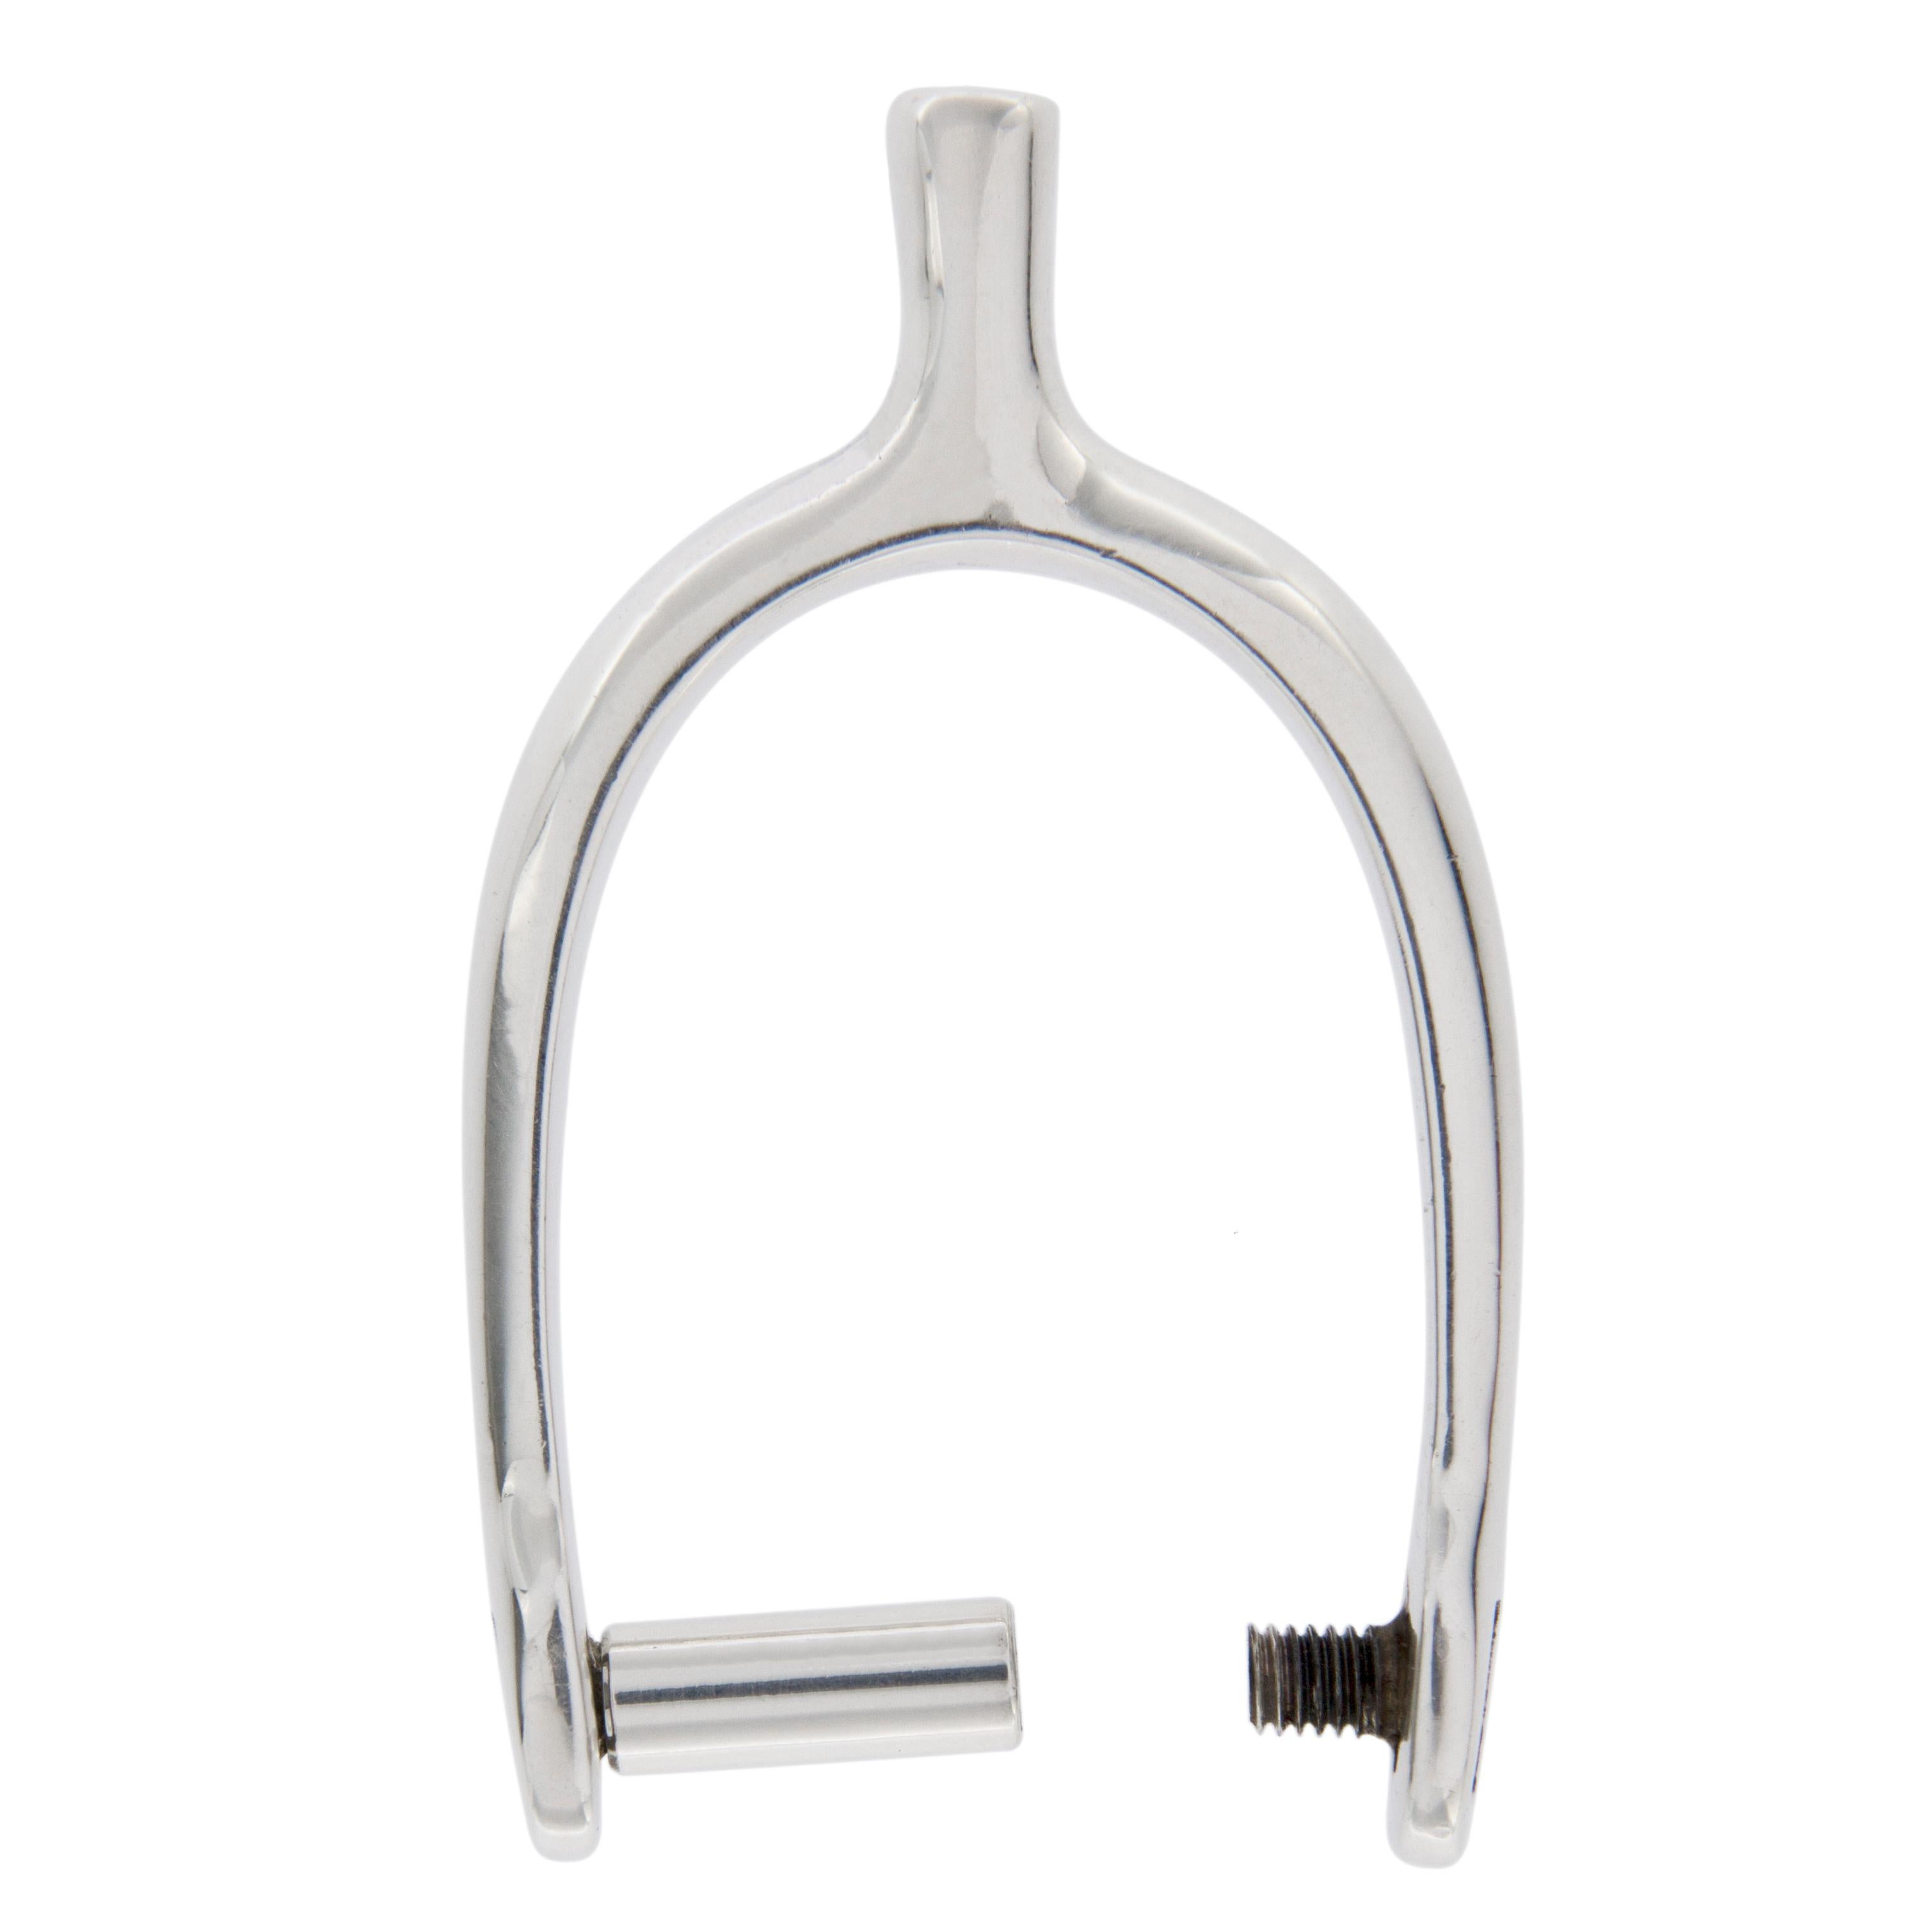 Alex Jona design collection, hand crafted in Italy, rhodium plated Sterling Silver Spur key holder.
Dimensions : L 1.76 in/ 44.86 mm x W 1 in/ 27 mm x Depth: 0.22 in/ 5.82 mm

Alex Jona gifts stand out, not only for their special design and for the